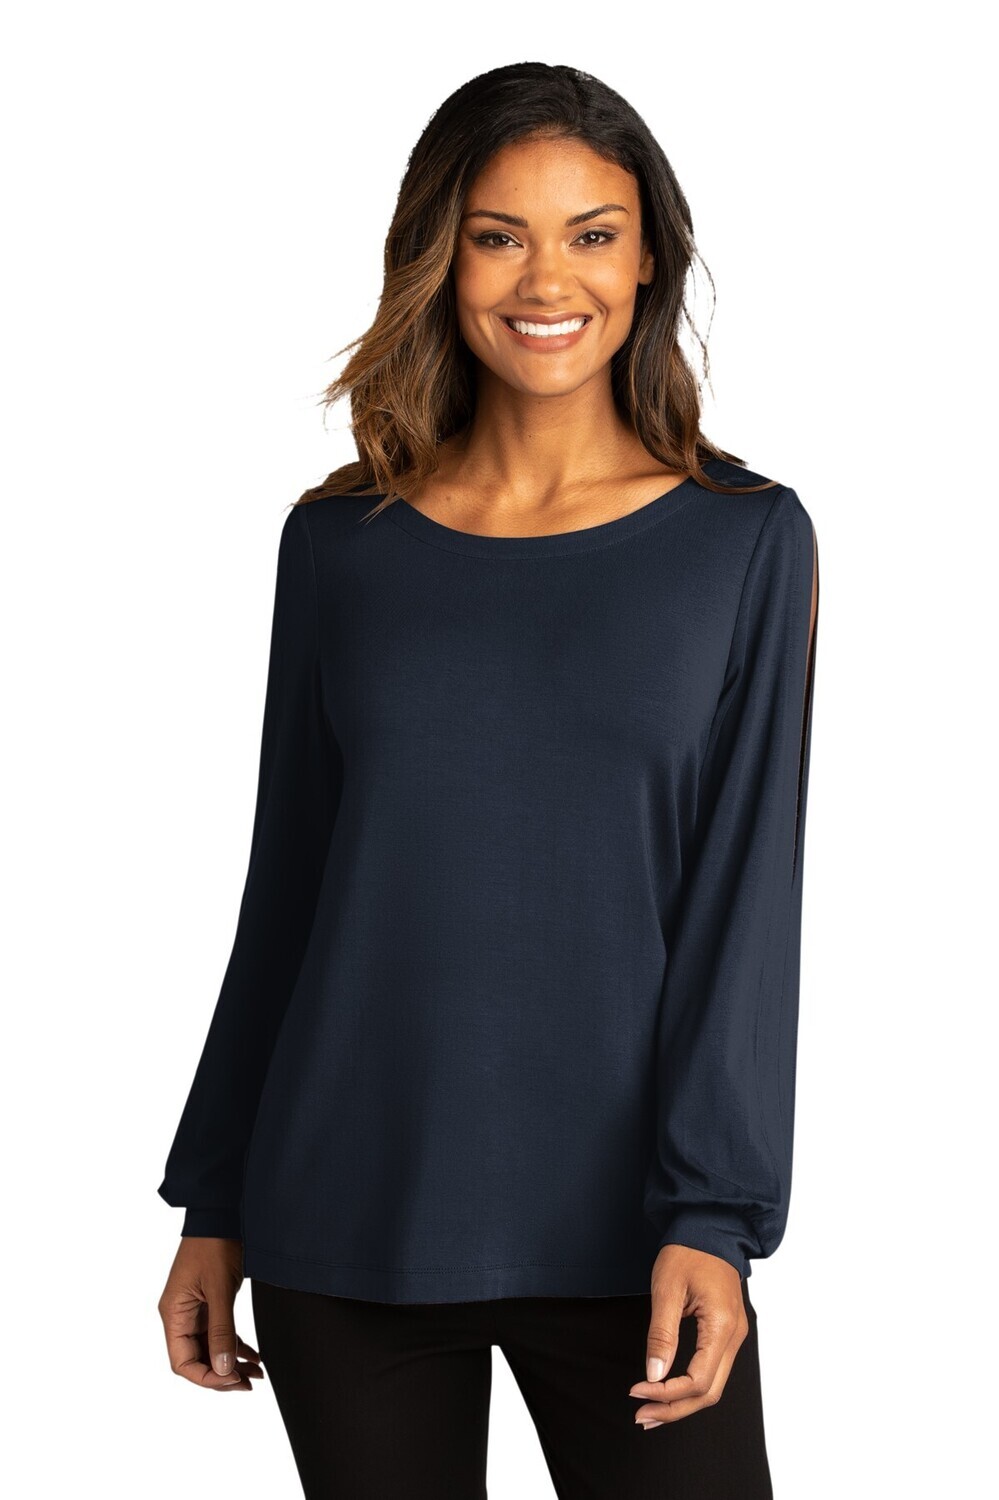 PORT AUTHORITY LADIES LUXE KNIT TOP (LK5600) RIVER NAVY BLUE - 2XL